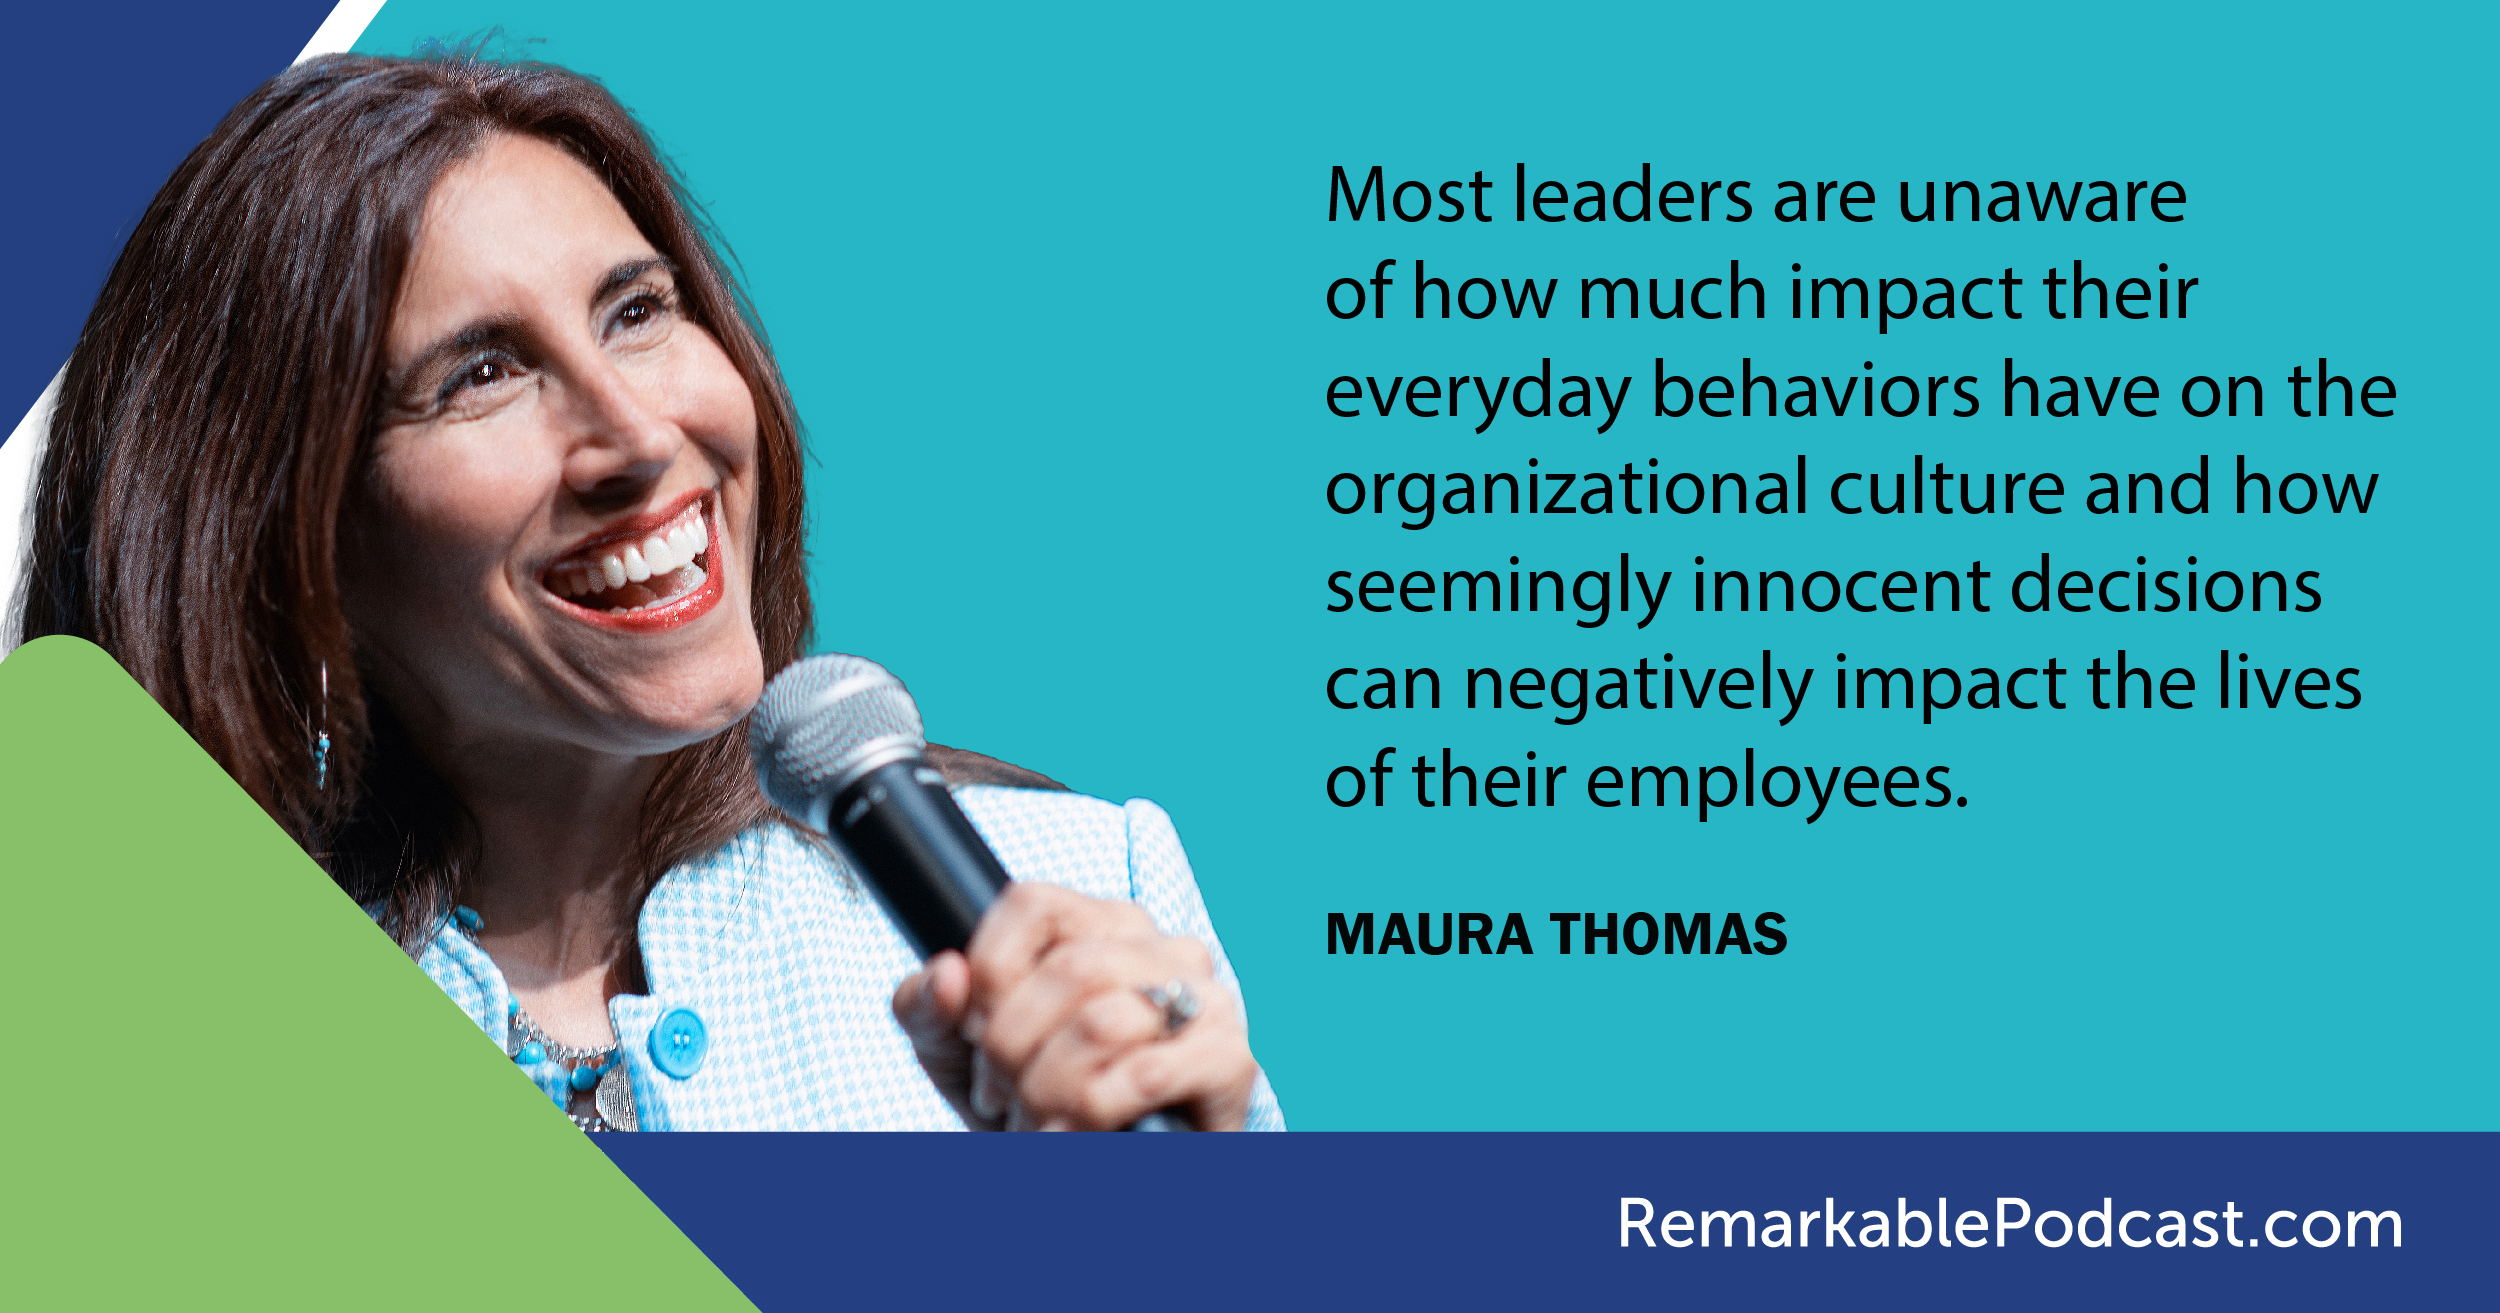 "Most leaders are unaware of how much impact their everyday behaviors have on the organizational culture and how seemingly innocent decisions can negatively impact the lives of their employees." Said by Maura Thomas on The Remarkable Leadership Podcast with Kevin Eikenberry